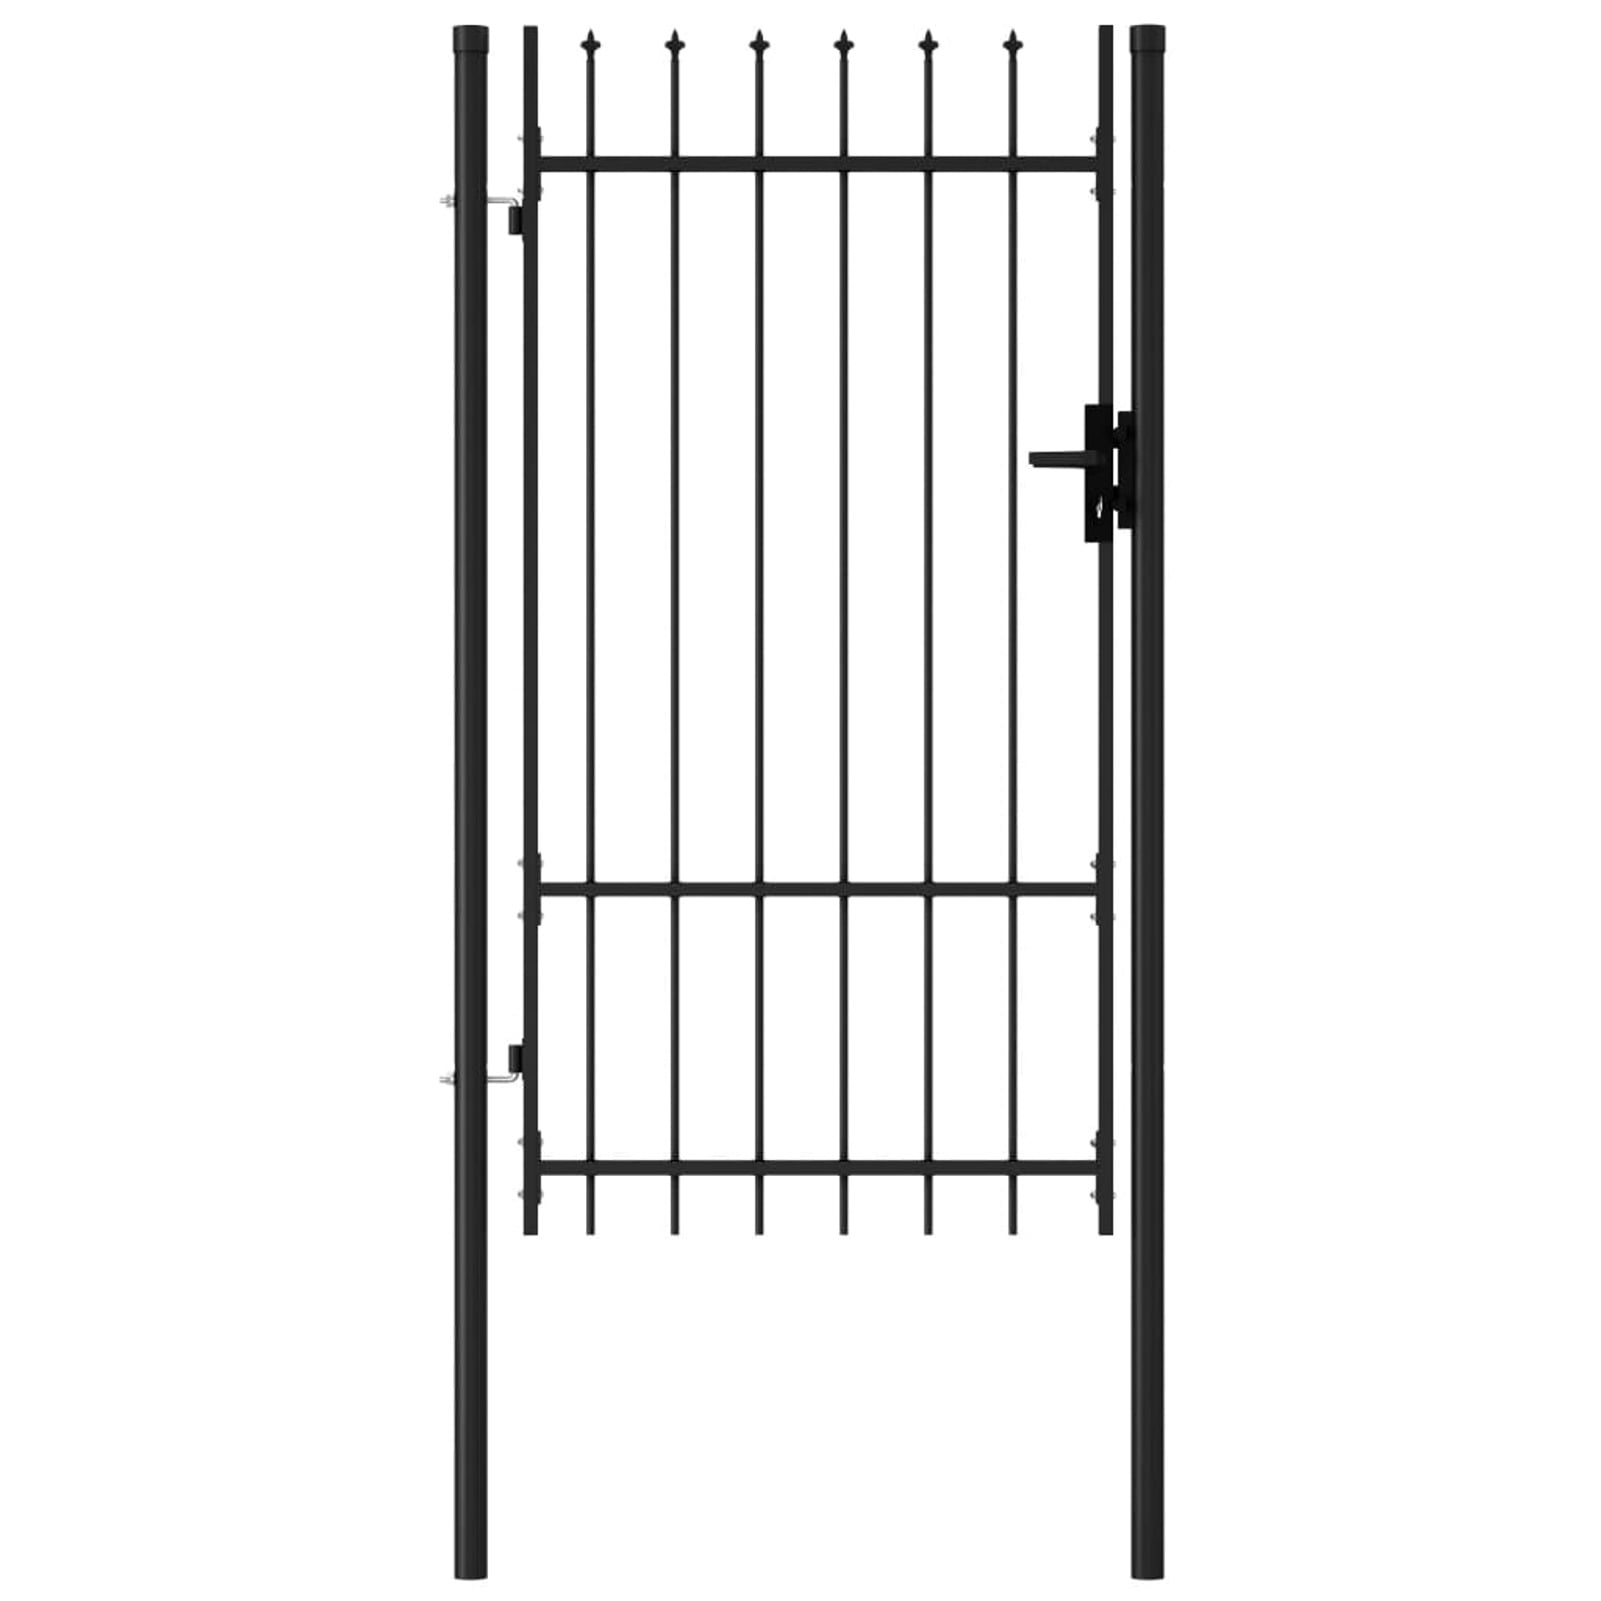 Details about   Extend-A-Gate add up to 2' to your chain link fence gate with 1-3/8" frame 